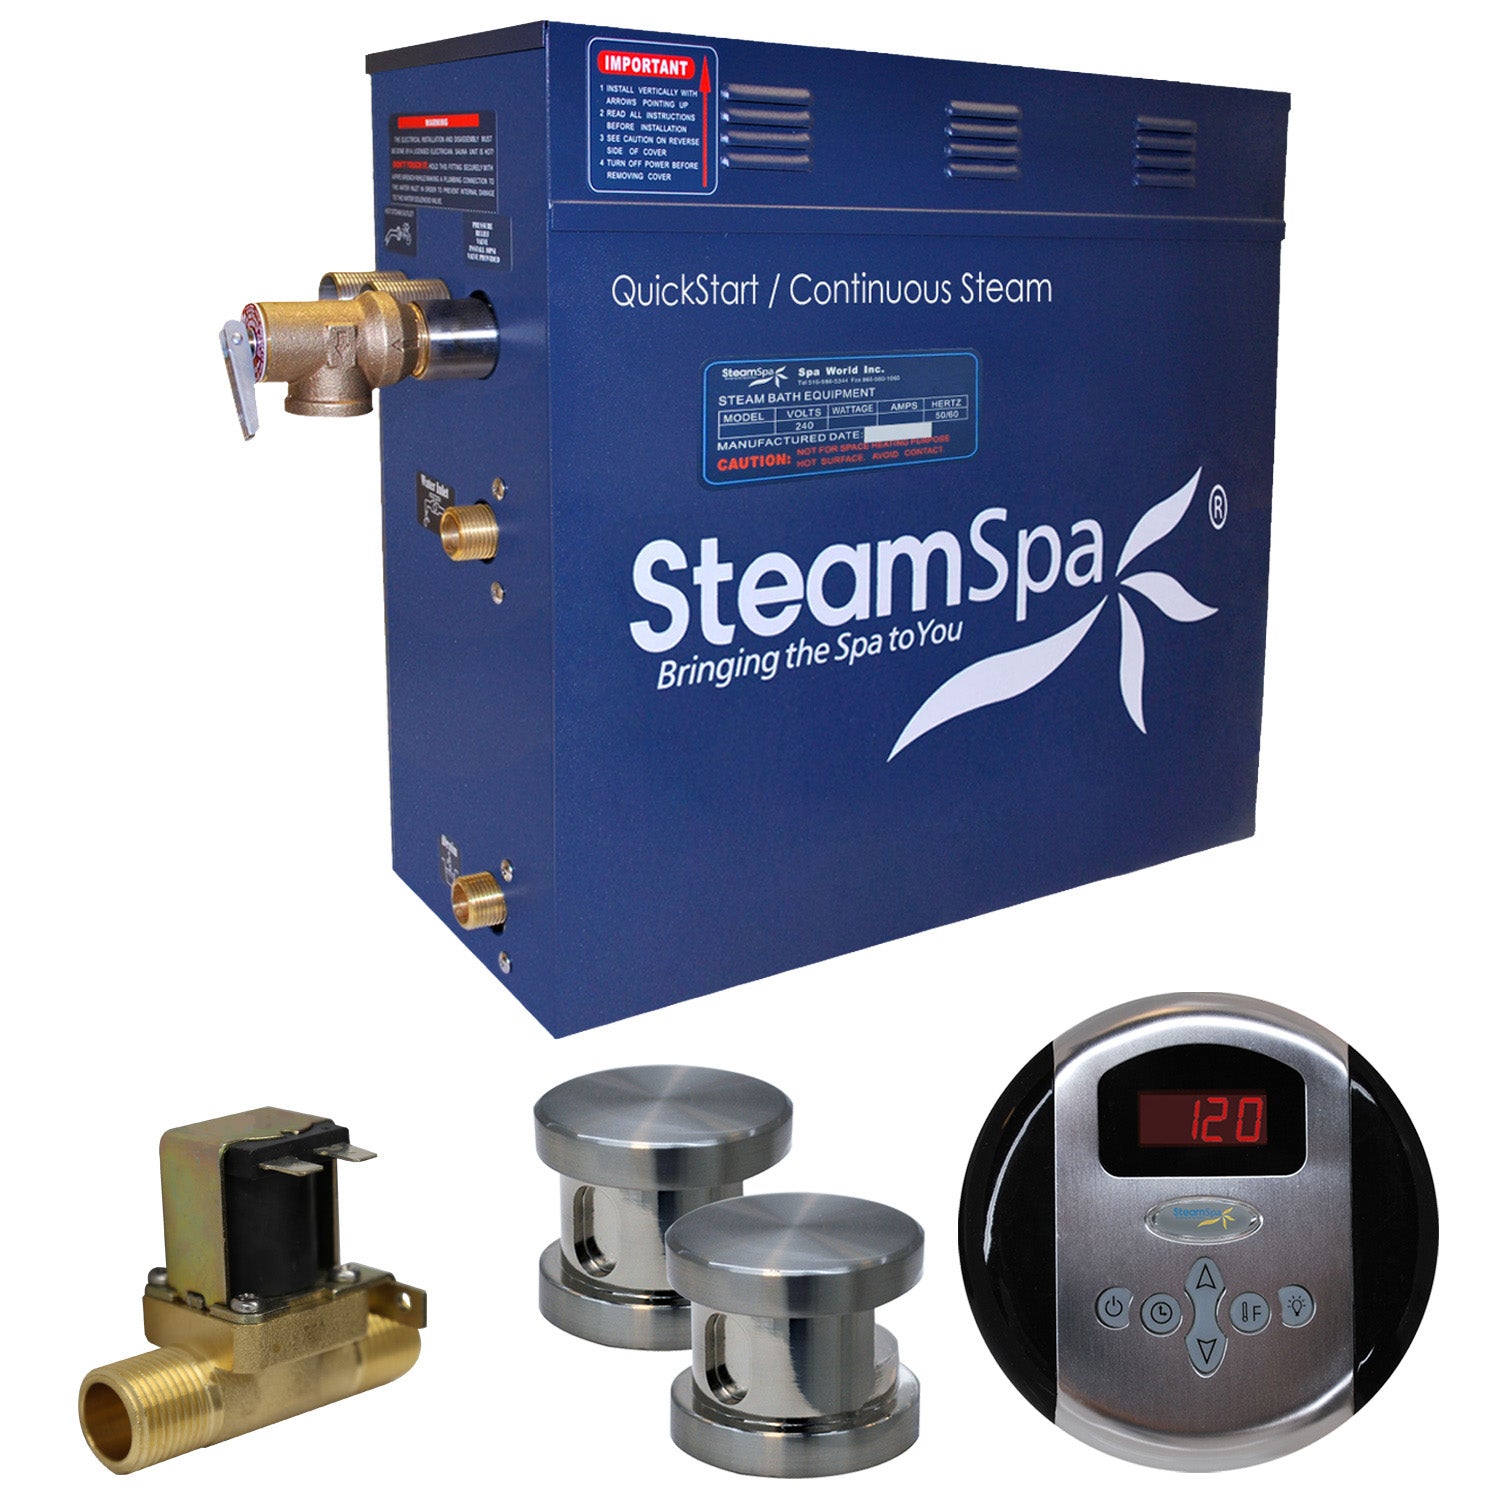 SteamSpa Oasis 4.5 KW QuickStart Acu-Steam Bath Generator Package - 12 in. L x 6 in. W x 2 in. H - Stainless Steel - Brushed Nickel finish - Includes a 4.5kW QuickStart Acu-Steam Bath Generator, Control Panel, Two Steam heads - OA450 - Vital Hydrotherapy